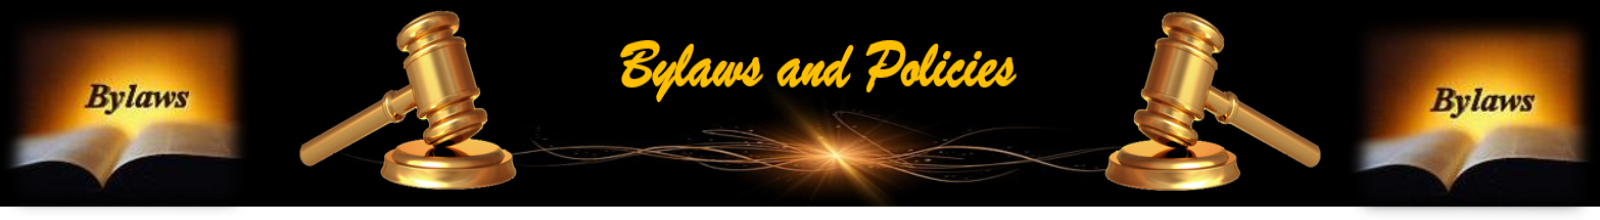 Bylaw books and Gavels with the words By-laws and Polices